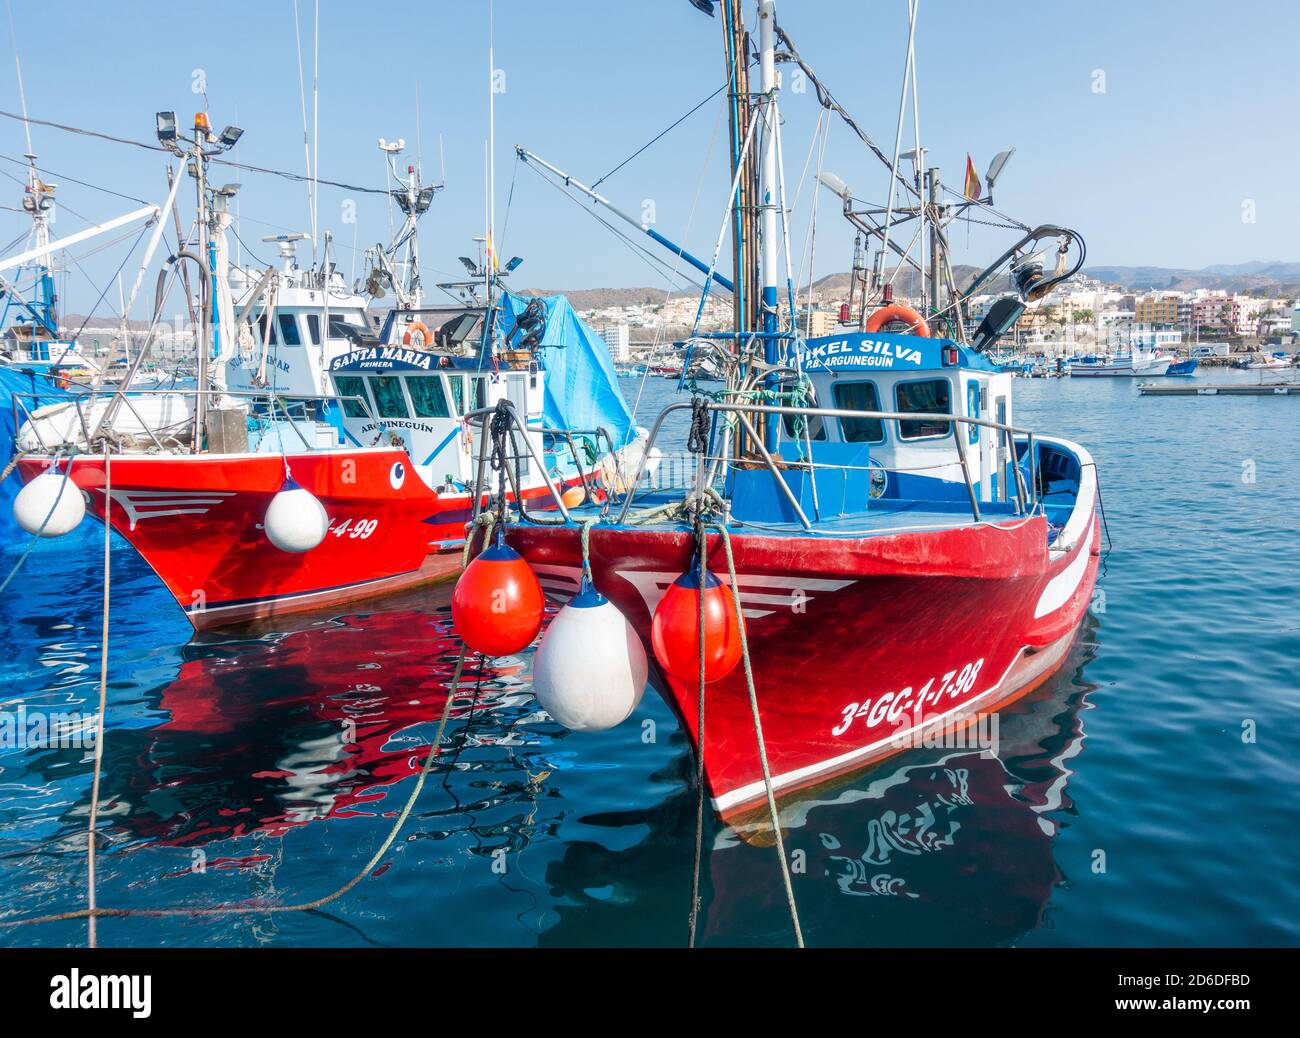 Fishing boats in harbour at Arguineguin on Gran Canaria, Canary Islands, Spain Stock Photo